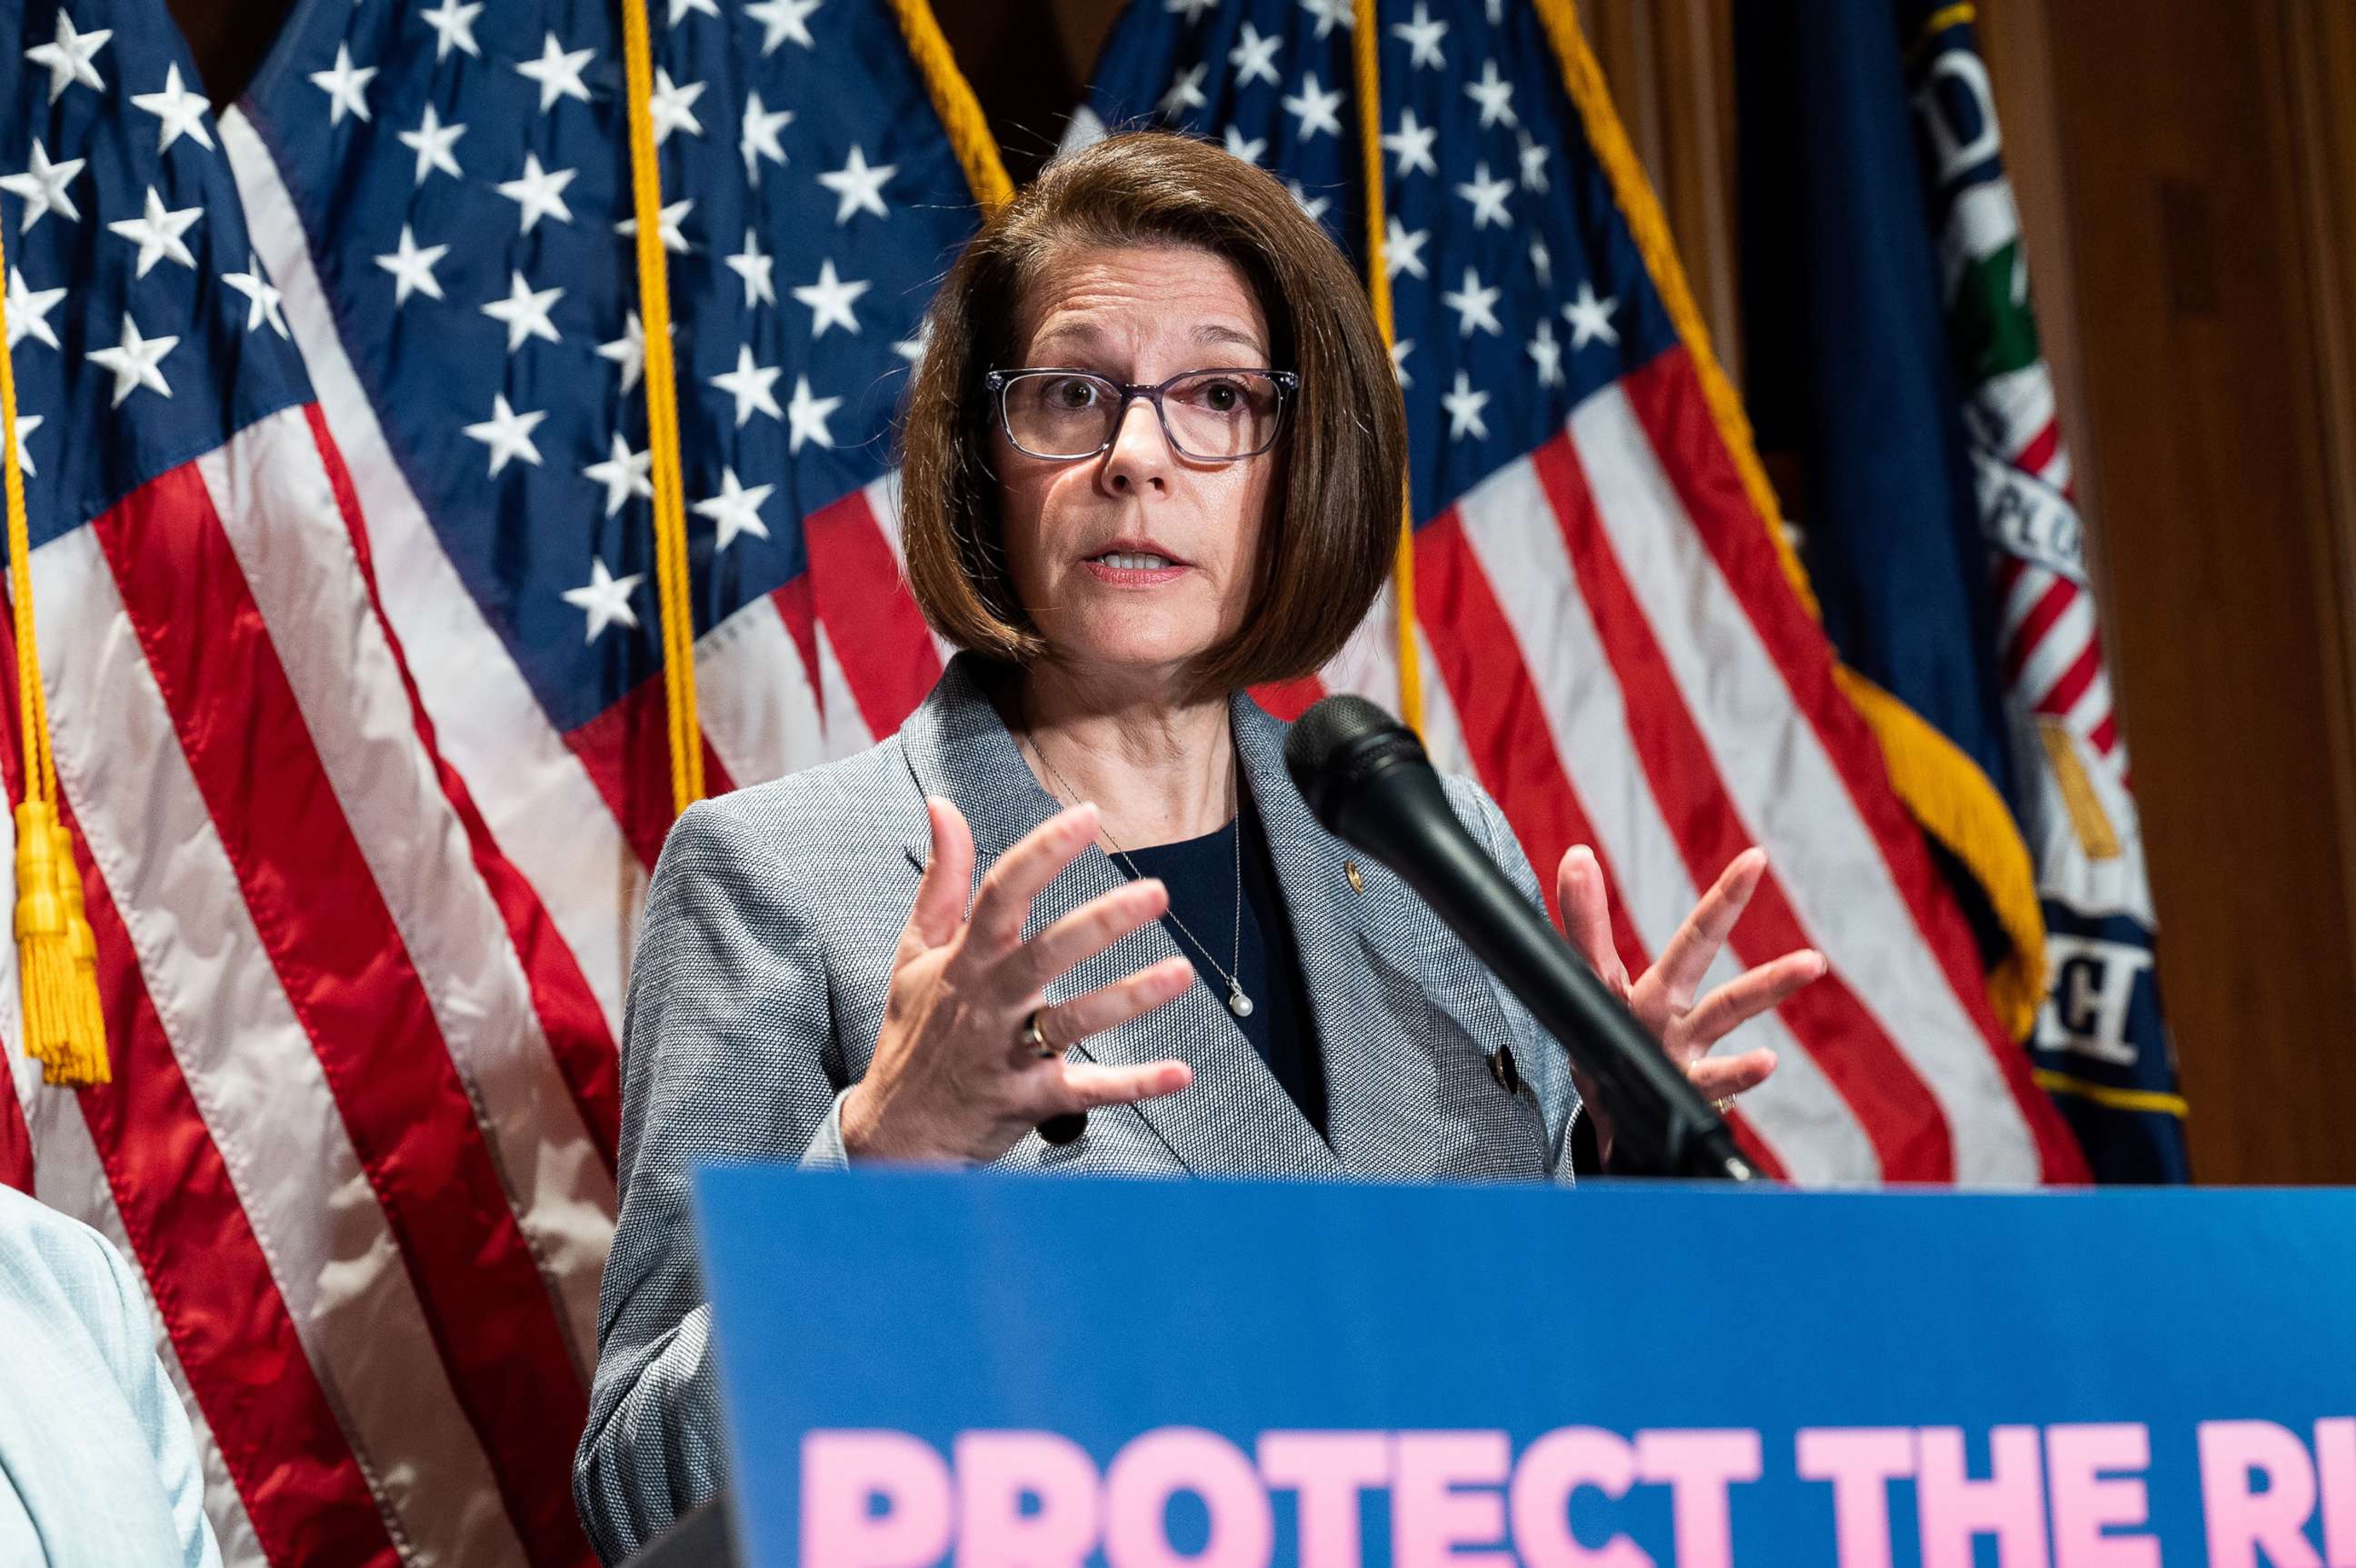 PHOTO: Senator Catherine Cortez Masto speaks at a press conference about the Freedom to Travel for Health Care Act which would specifically allow women to travel for abortion, in Washington, D.C., on July 12, 2022.